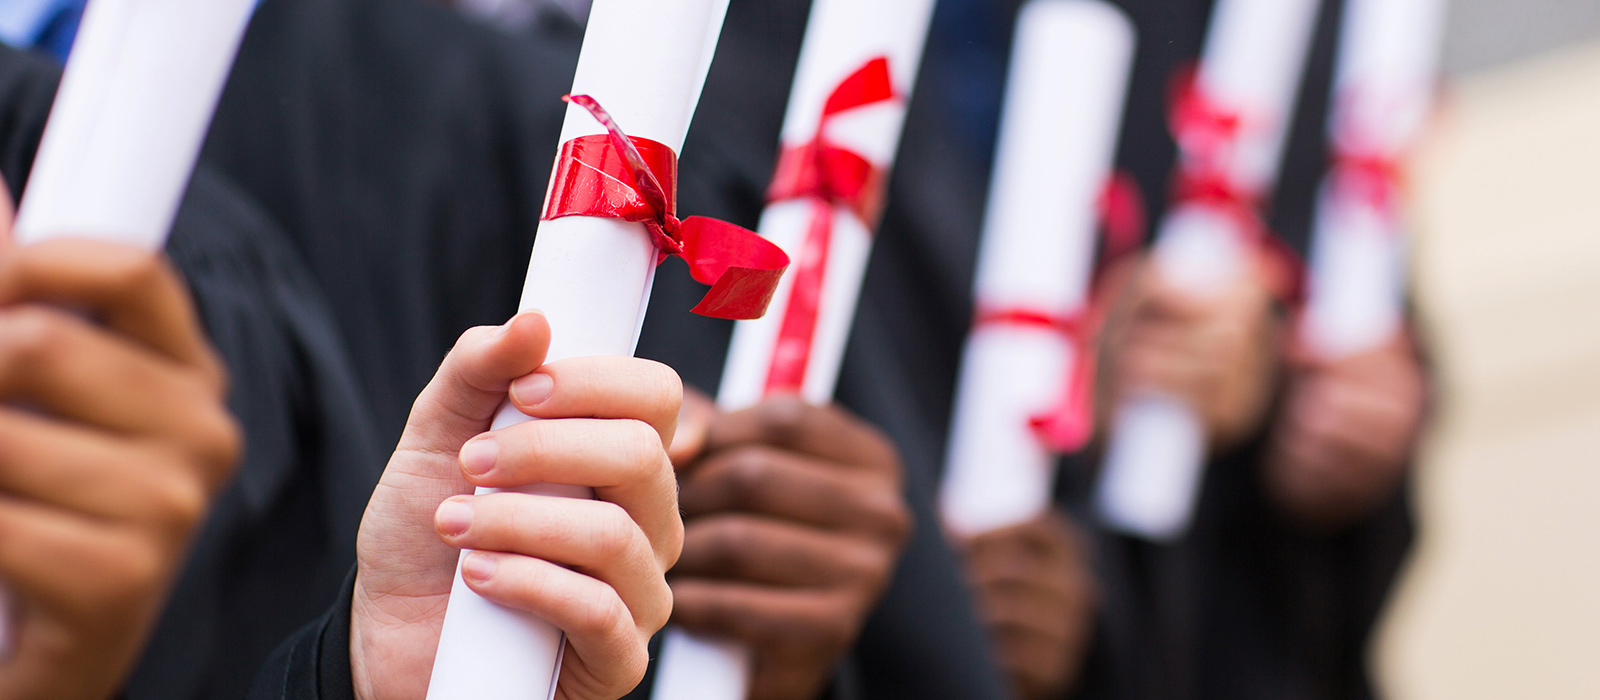 A row of students holding their degrees. Only hands and degrees are visible.